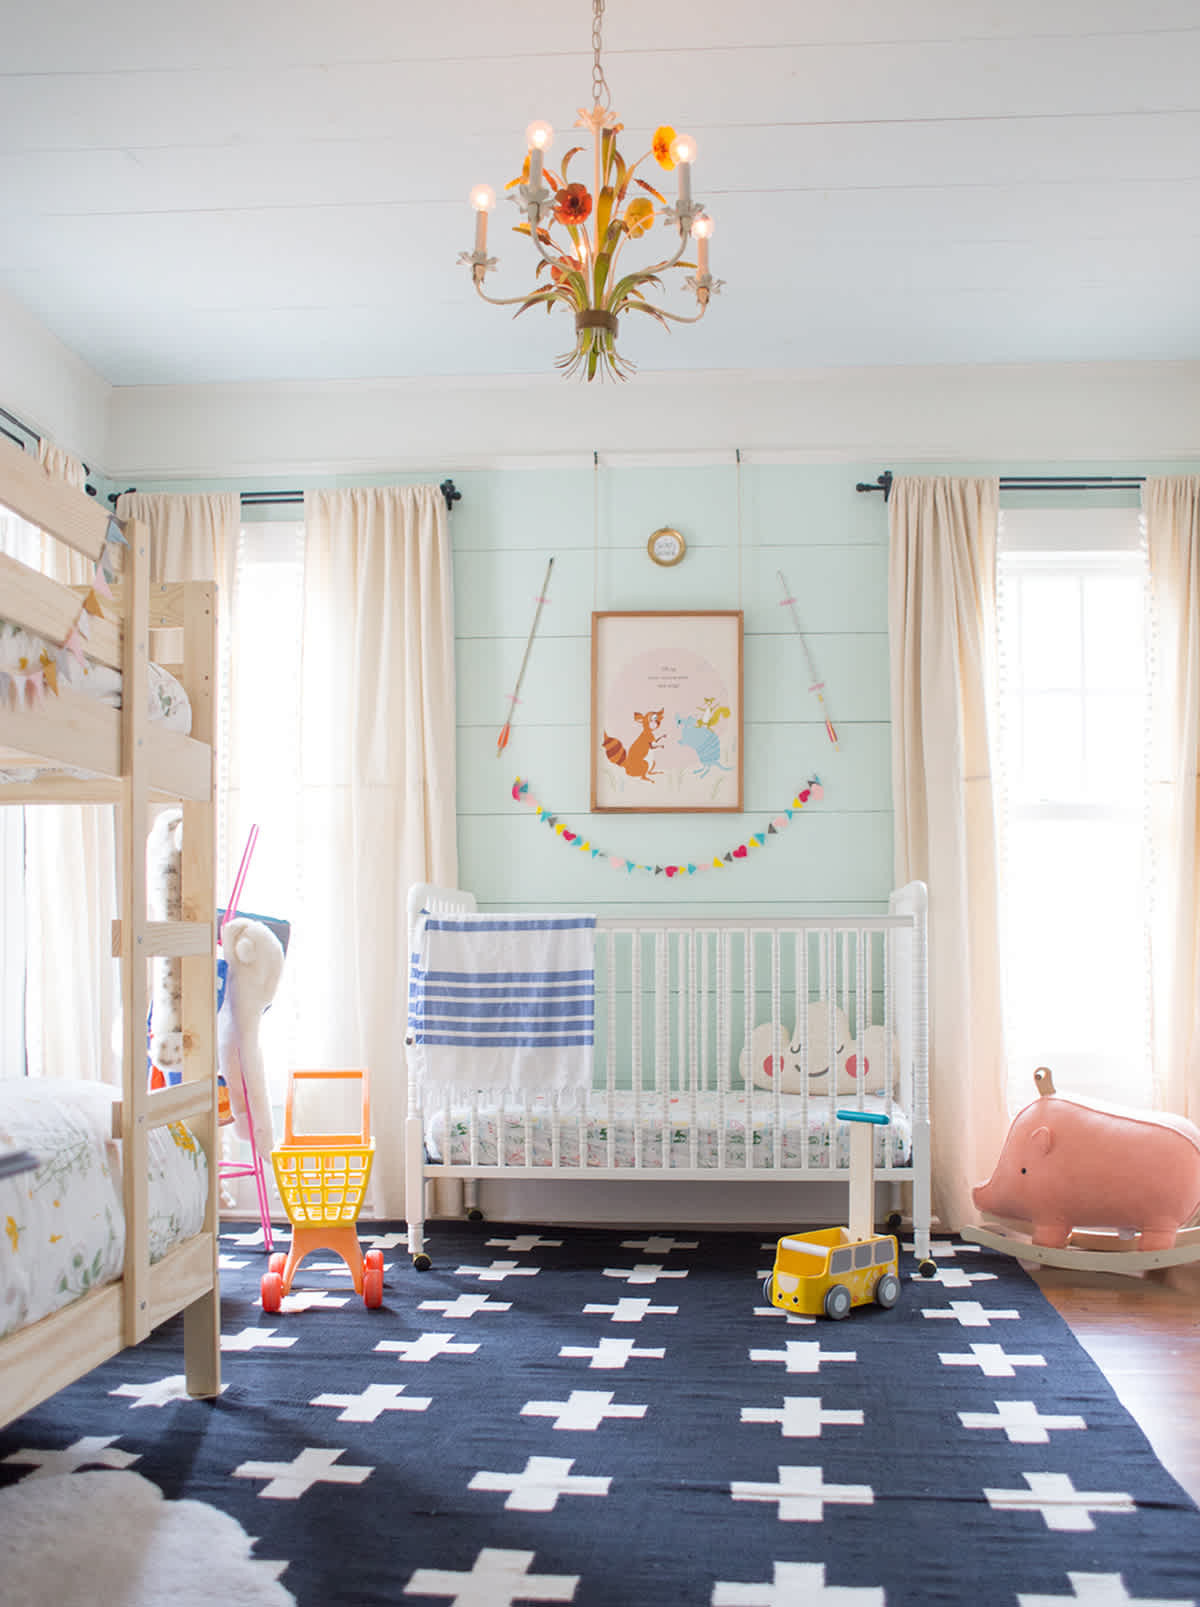 Kids Room Paint Colors
 My Favorite Paint Colors For Kids Rooms And Baby Rooms